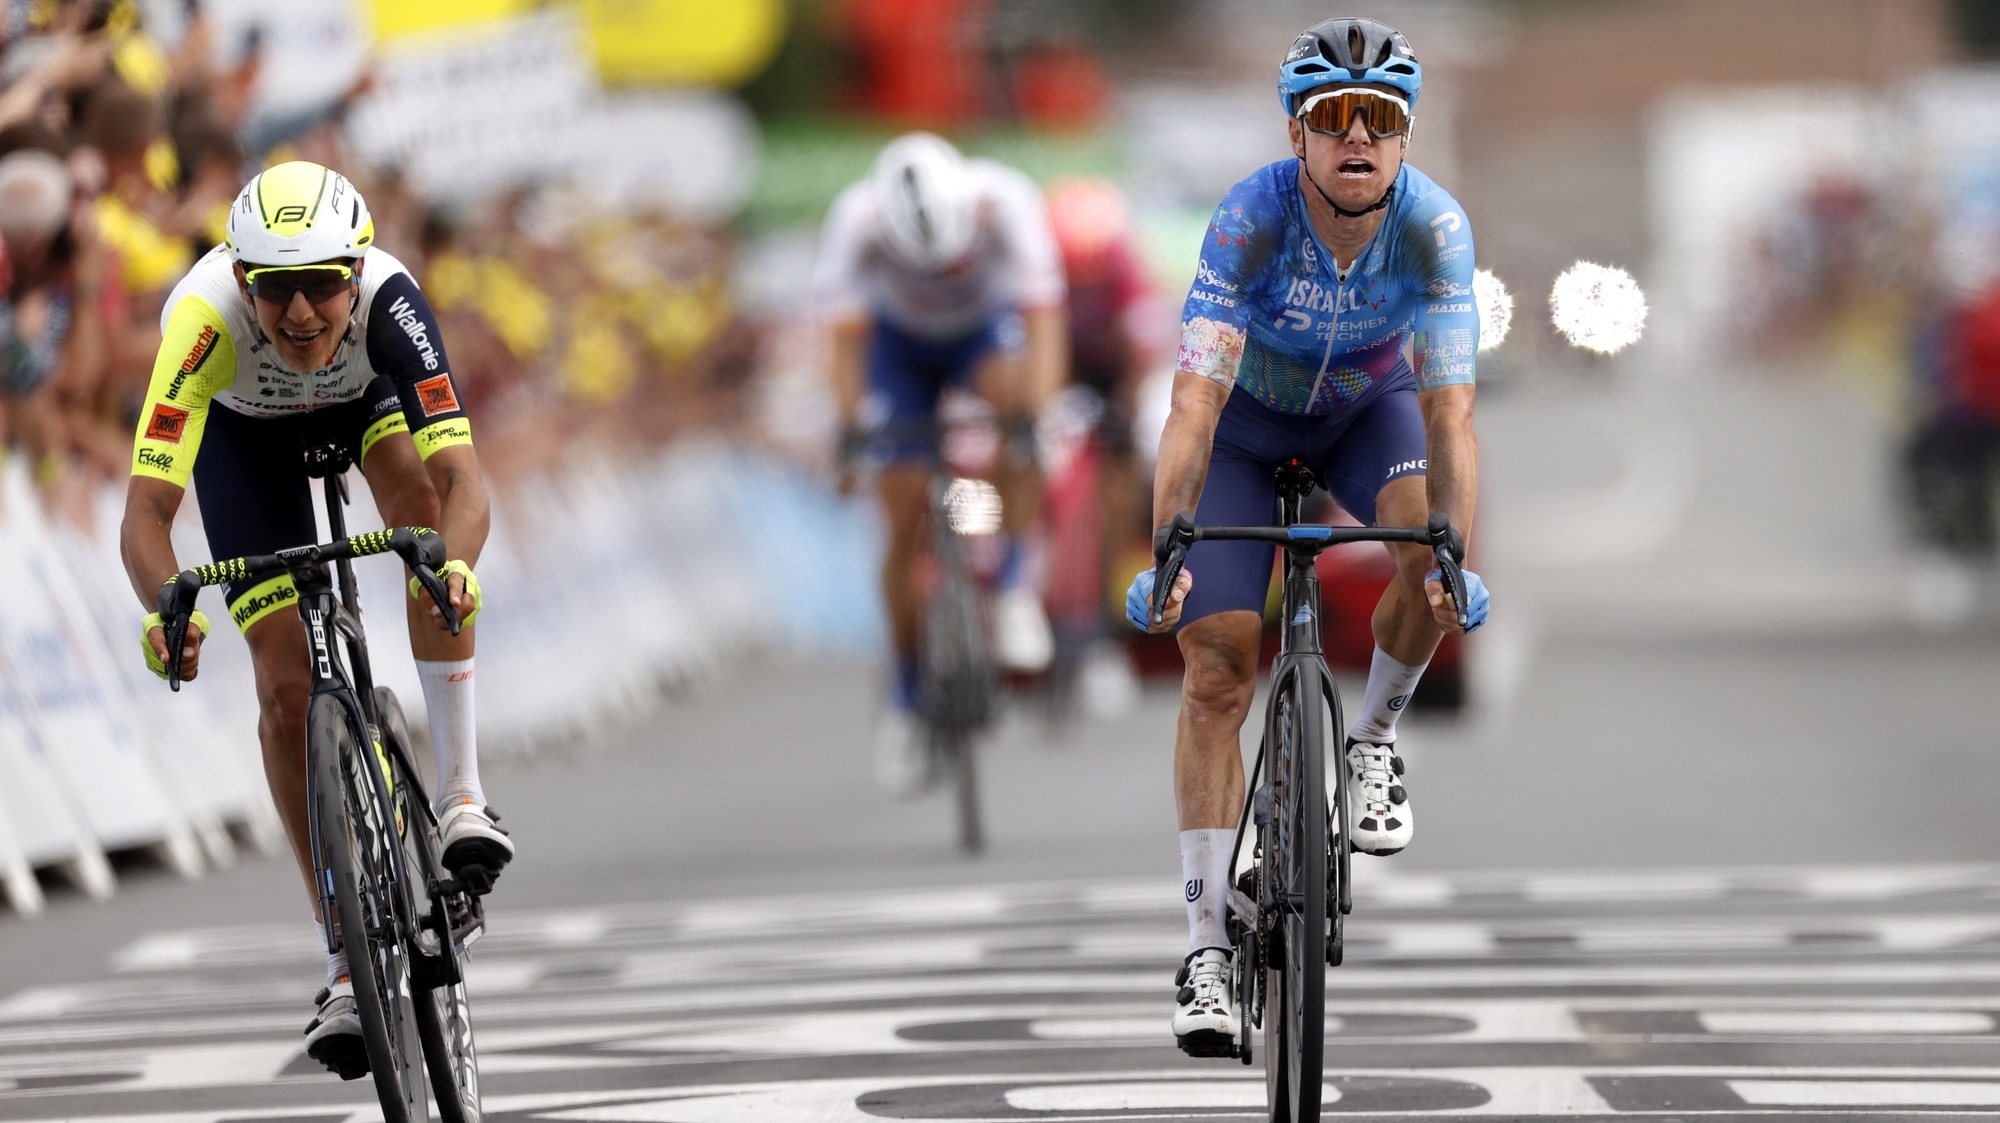 epa10055290 Australian rider Simon Clarke (R) of Israel Premier Tech wins the 5th stage of the Tour de France 2022 over 157km from Lille to Arenberg Porte de Hainaut, Wallers-Arenberg, France, 06 July 2022. Dutch rider Taco Van Der Hoorn (L) of Intermarche Wanty Gobert Materiaux places second.  EPA/YOAN VALAT